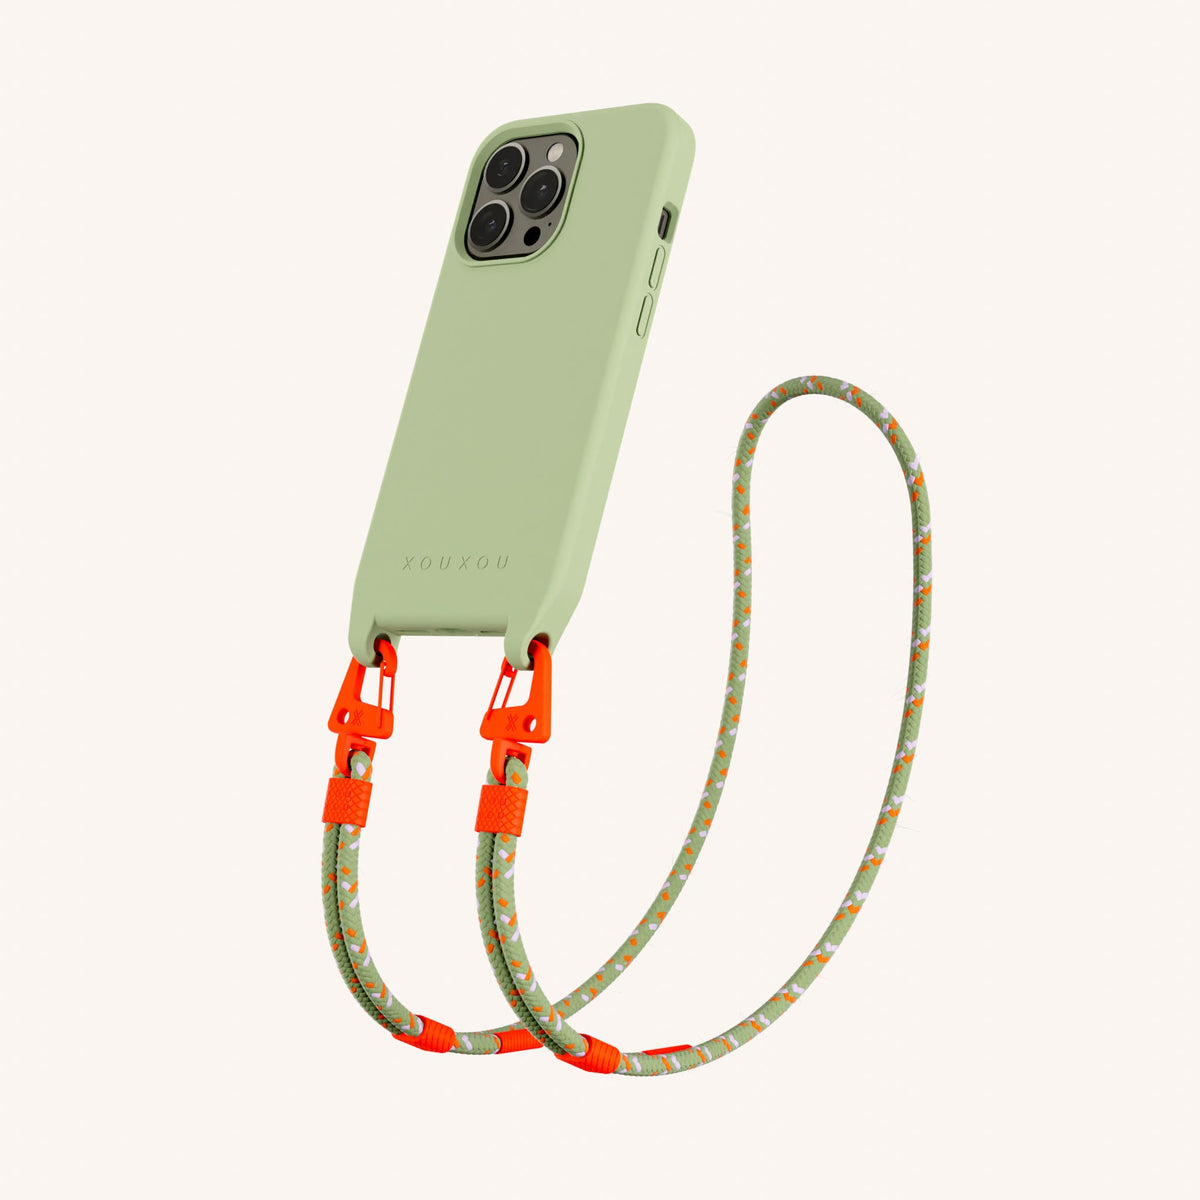 Phone Necklace with Carabiner Rope for iPhone 13 Pro with MagSafe in Light Olive + Orange Camouflage Perspective View | XOUXOU #phone model_iphone 13 pro